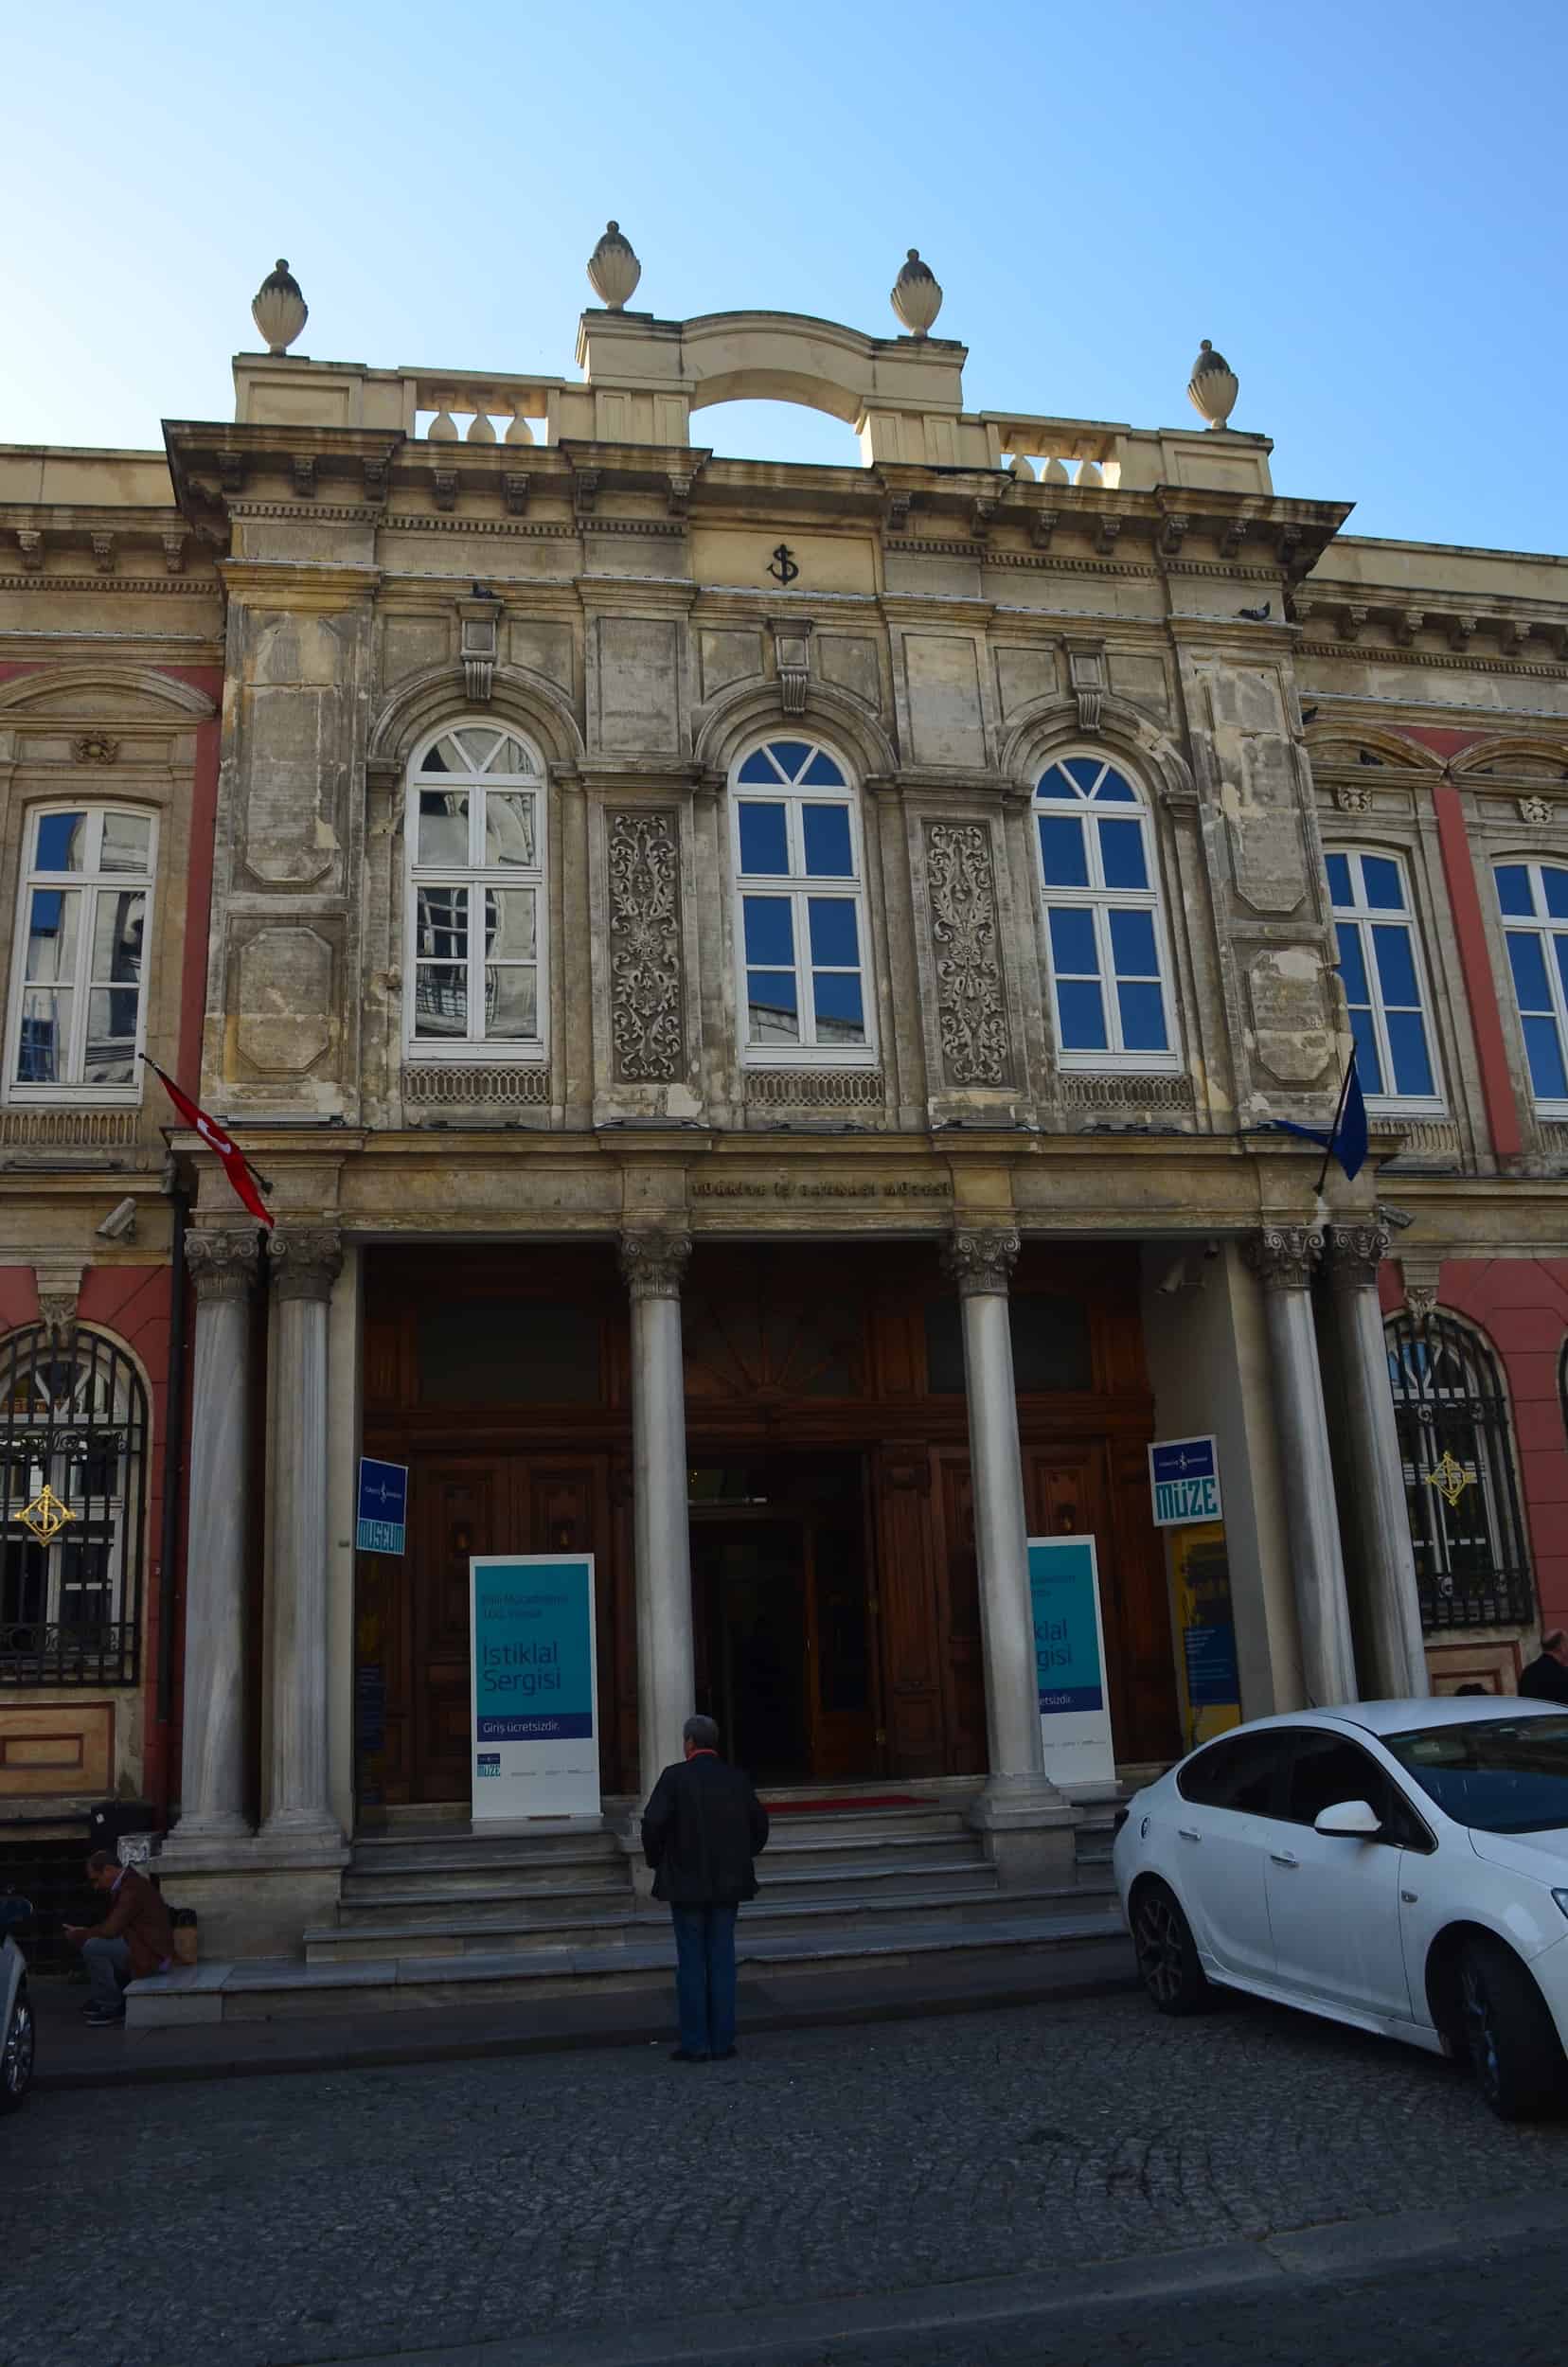 Entrance to the İşbank Museum